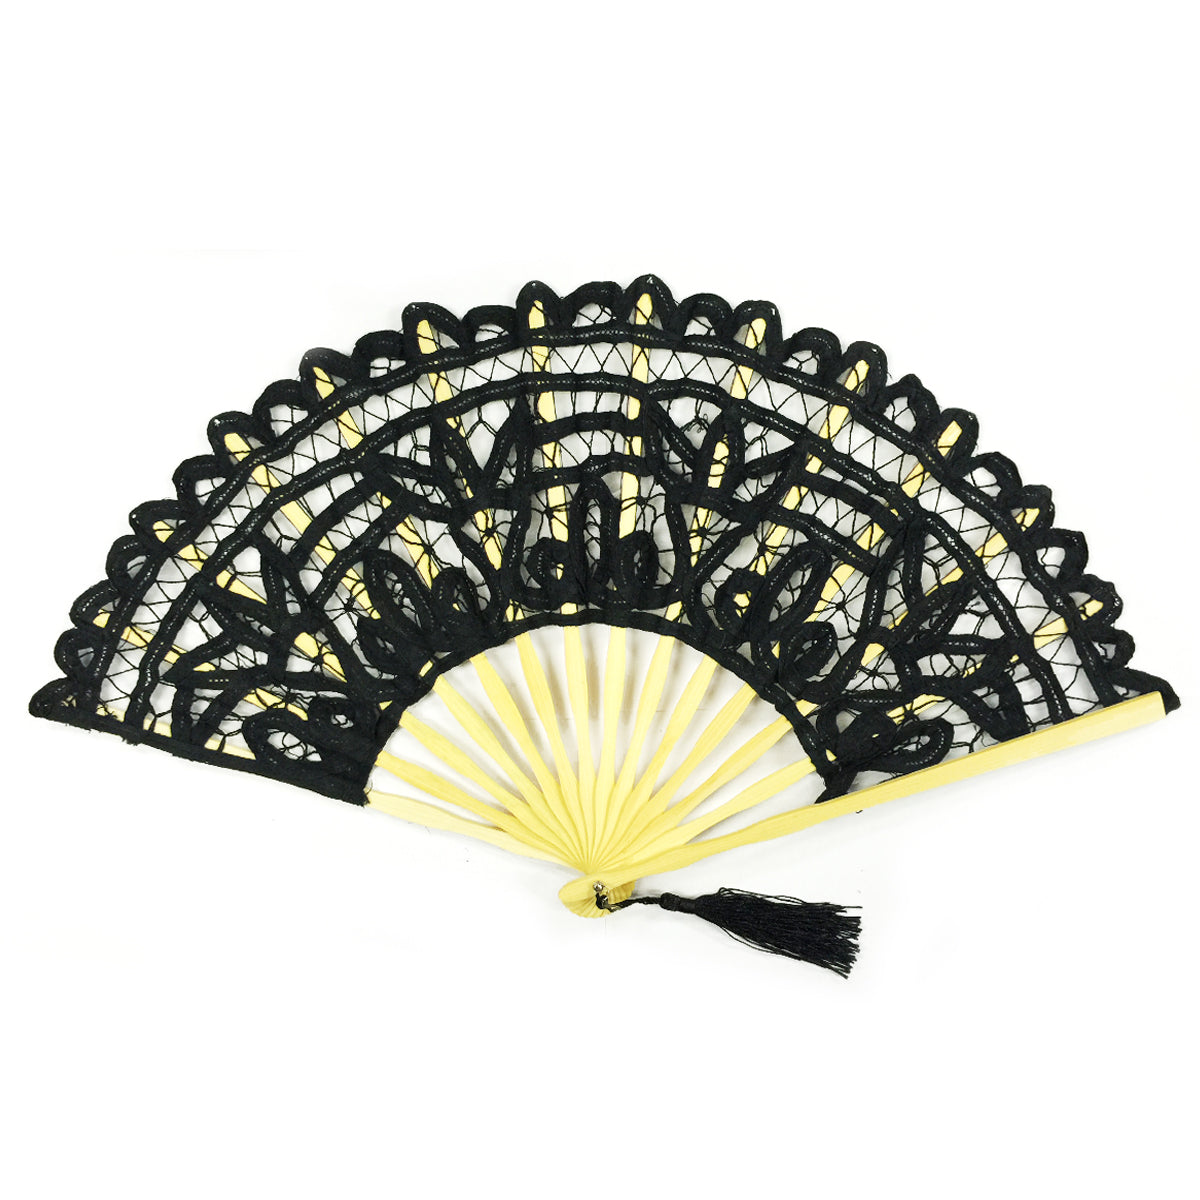 Wrapables Floral Lace Handheld Folding Fan with Tassel